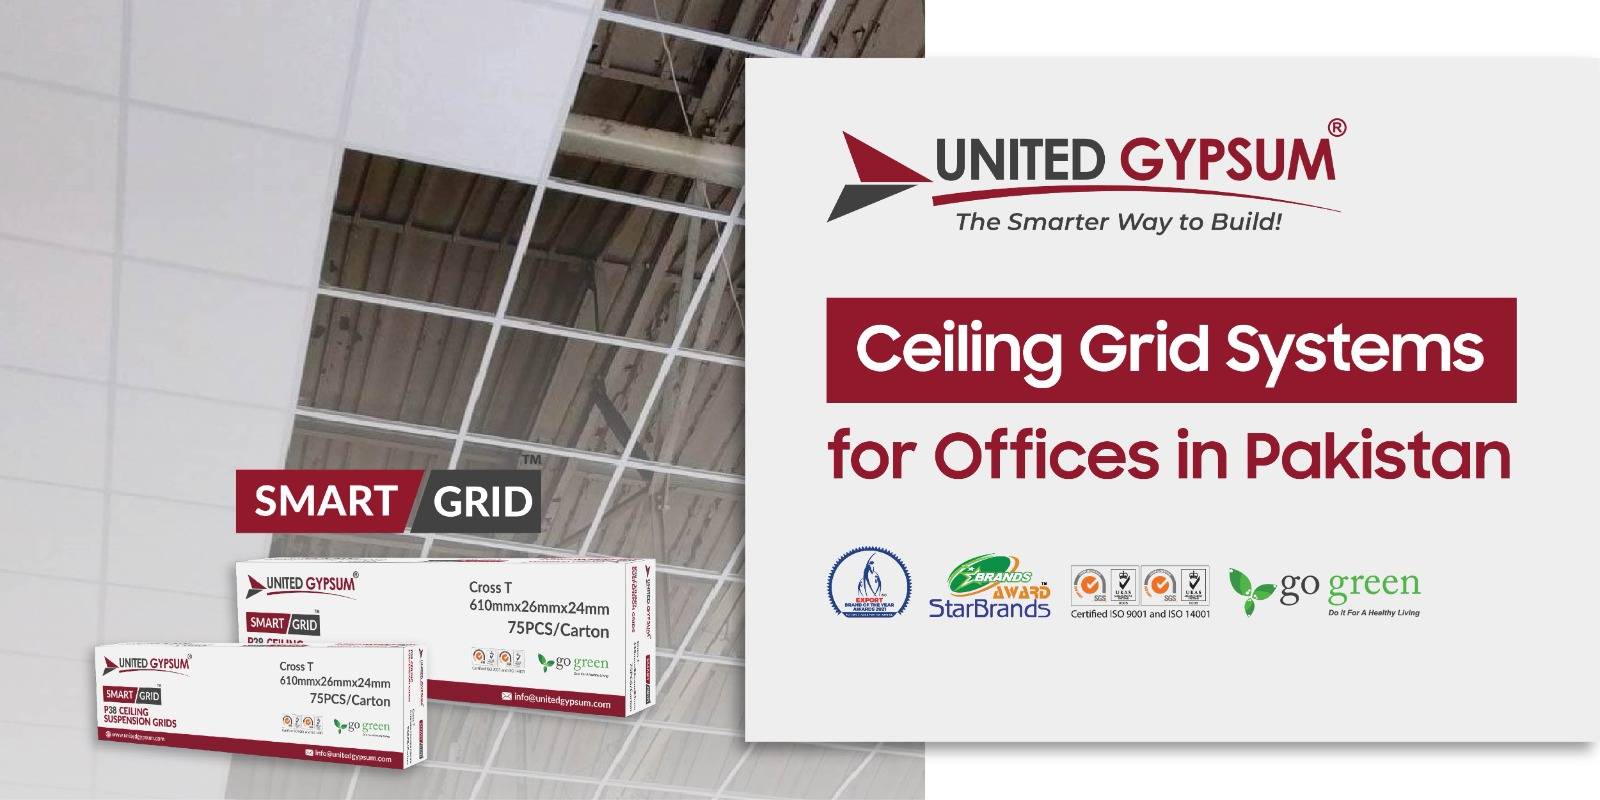 Ceiling Grid Systems for Offices in Pakistan